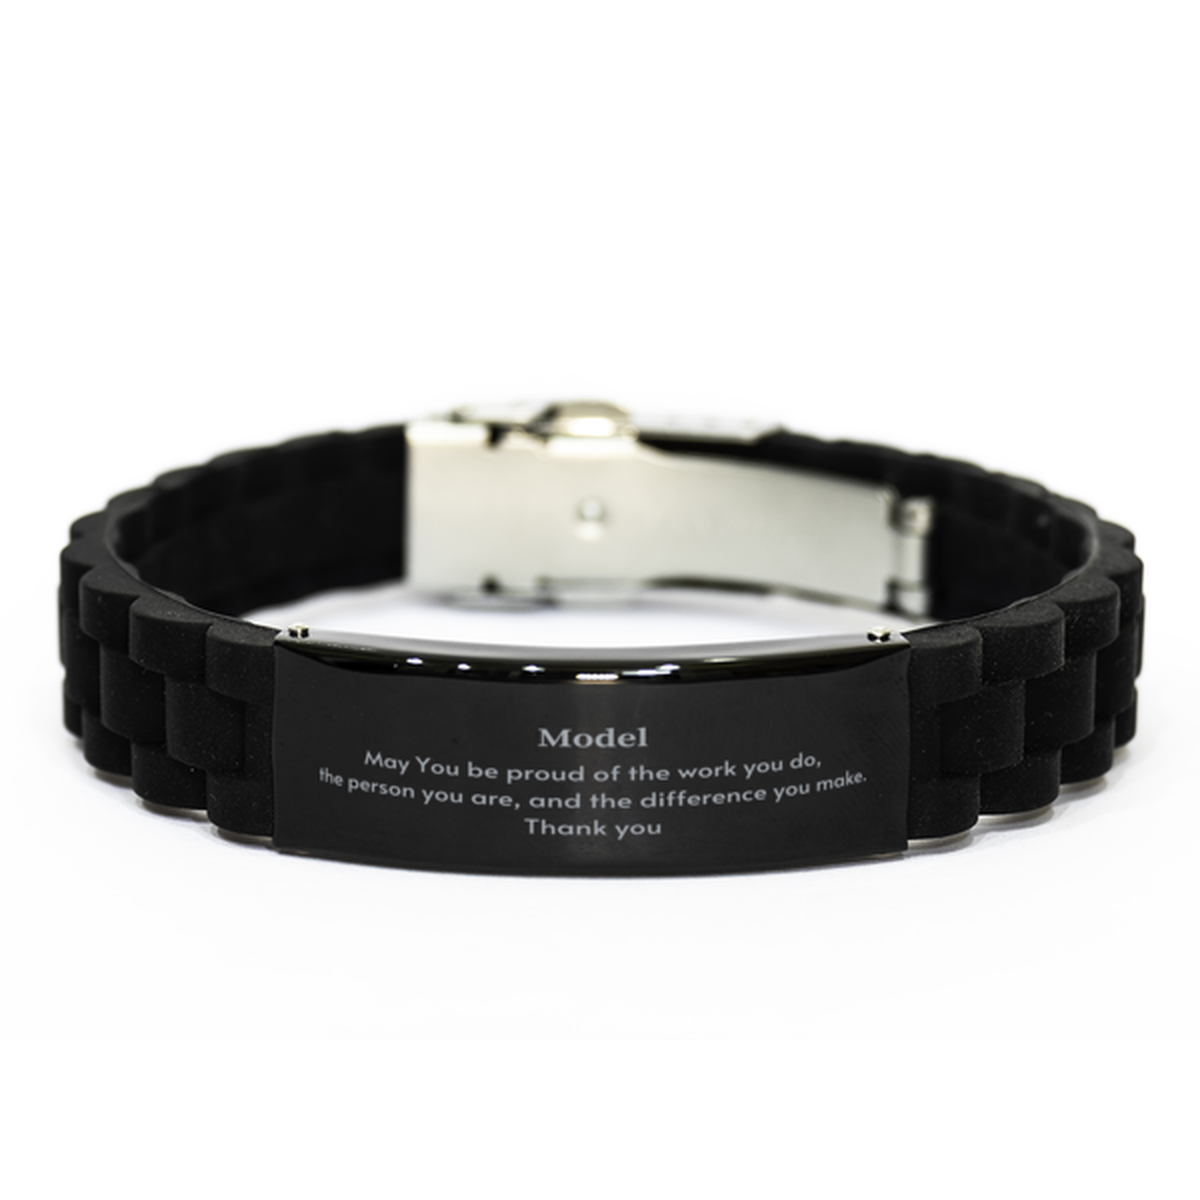 Heartwarming Black Glidelock Clasp Bracelet Retirement Coworkers Gifts for Model, Model May You be proud of the work you do, the person you are Gifts for Boss Men Women Friends